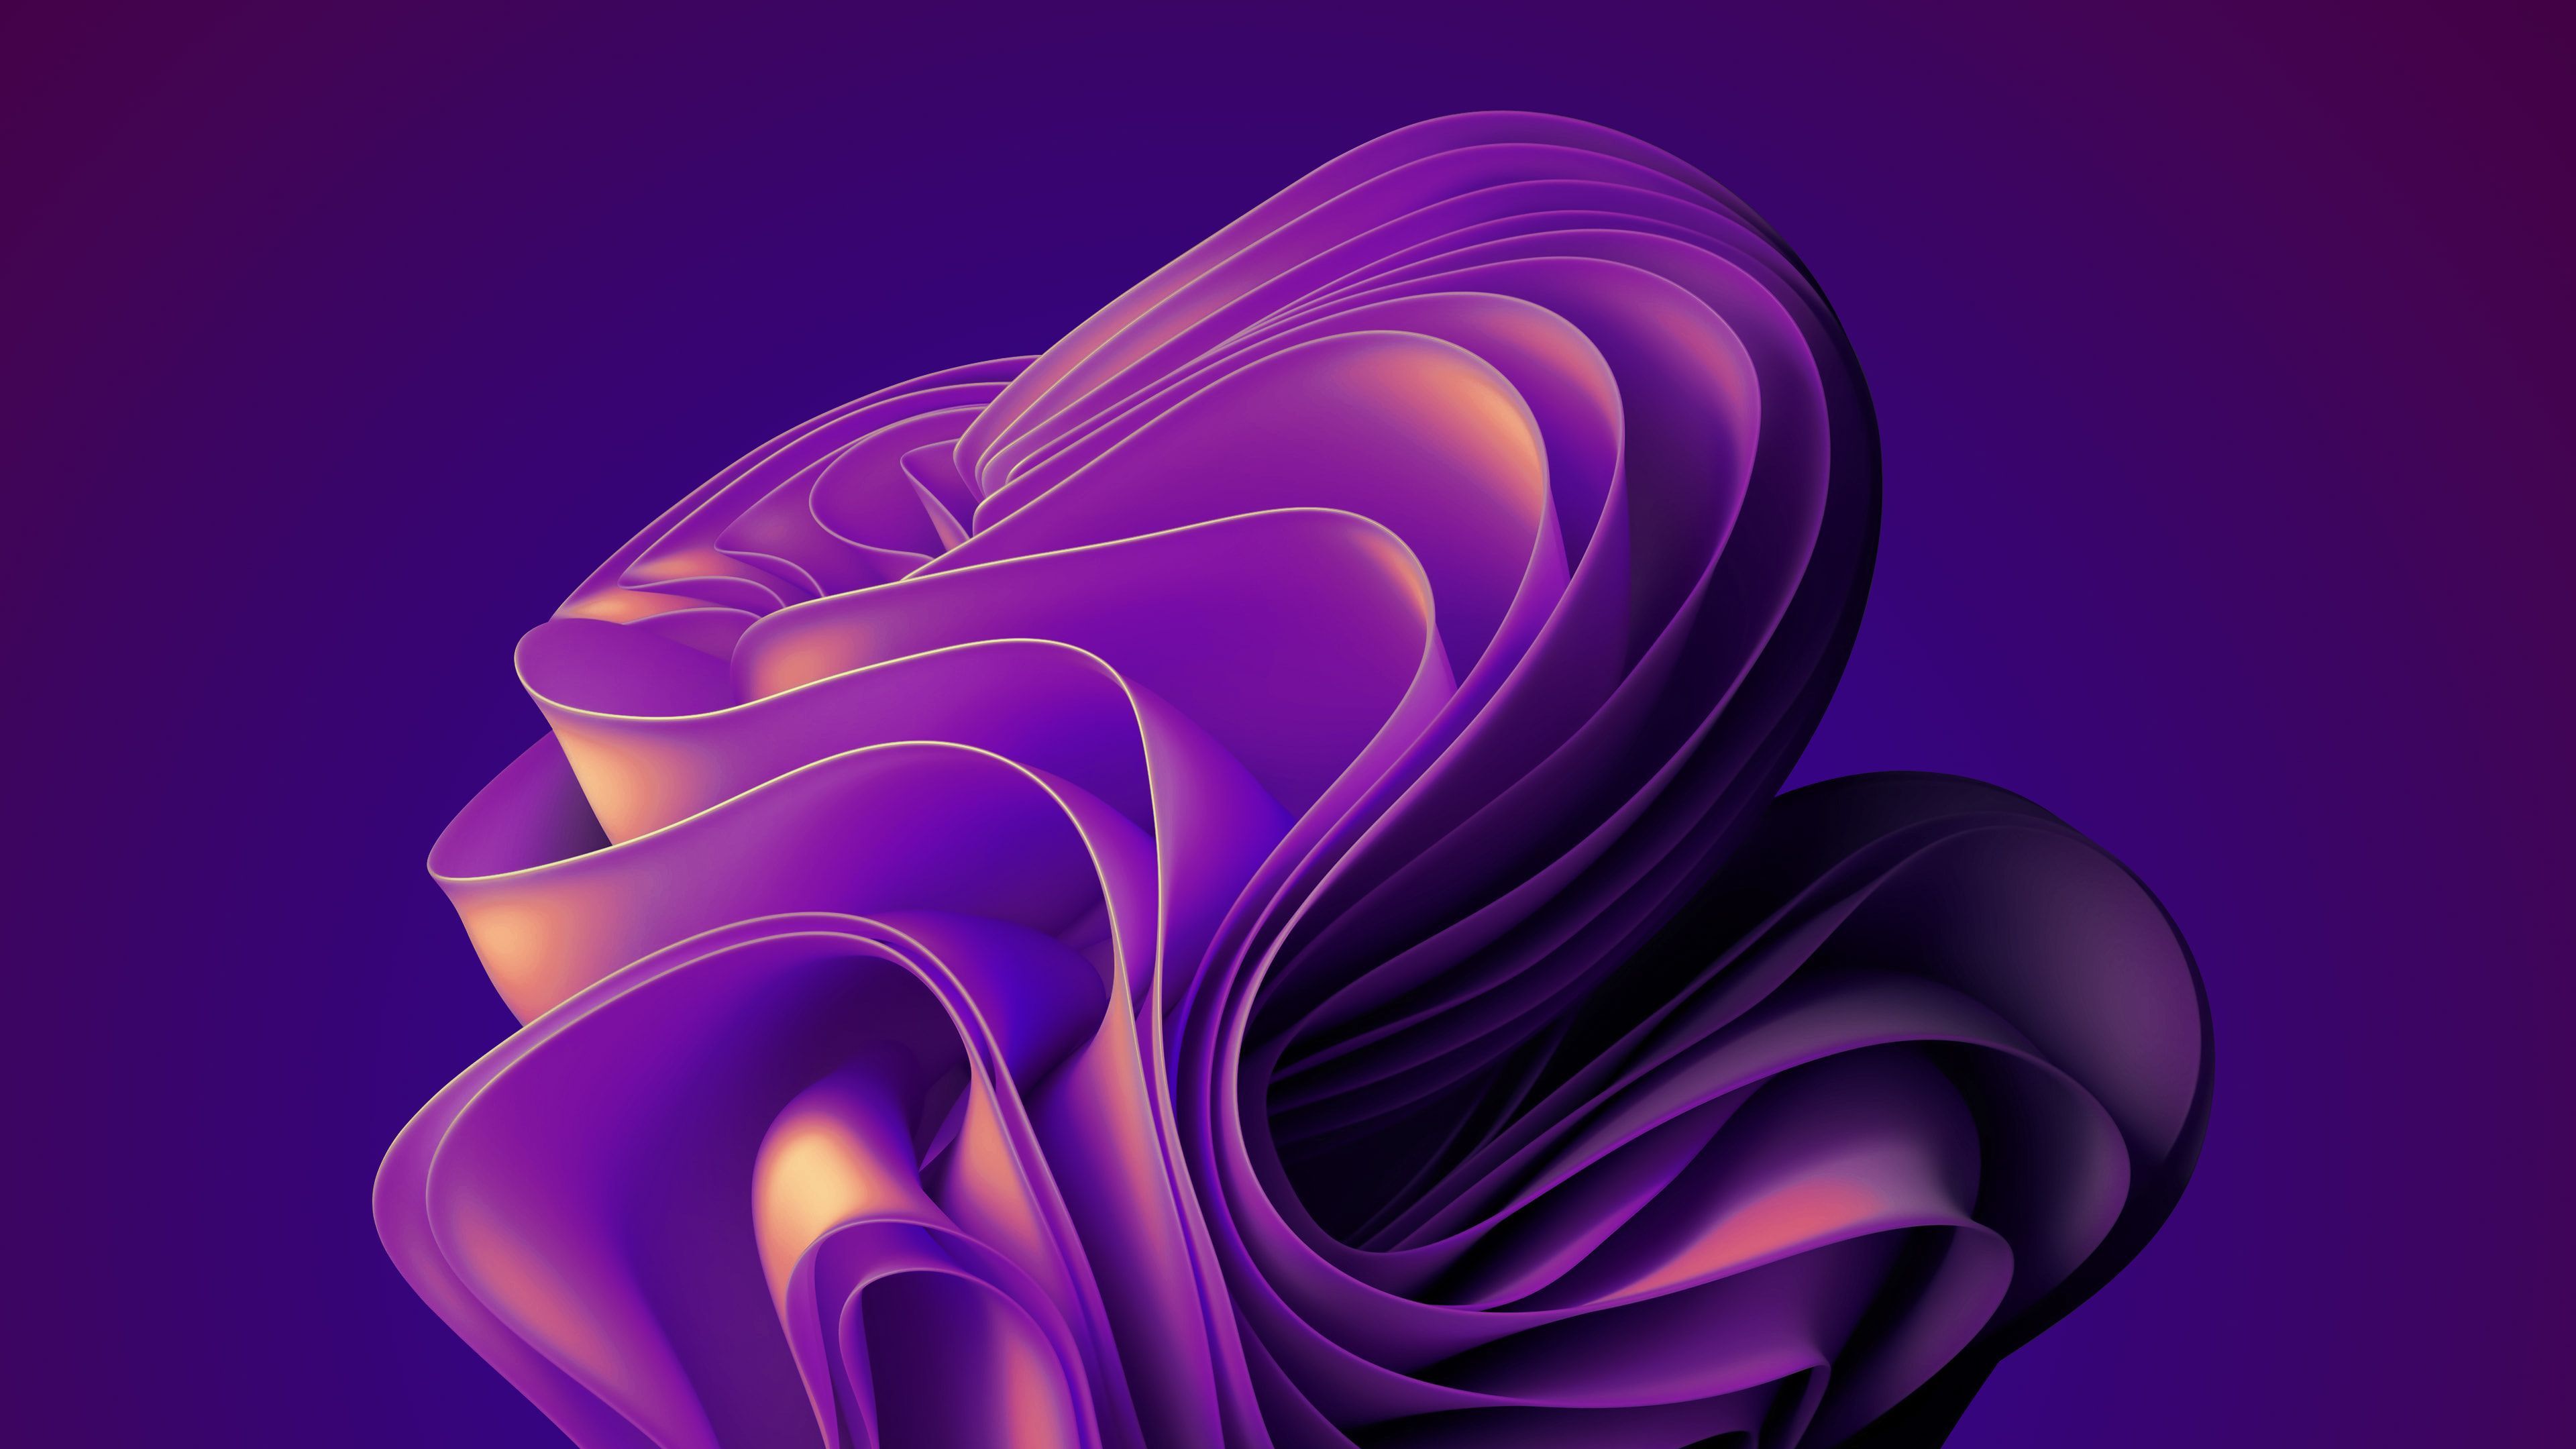 A purple abstract 3D image of a flower with a dark purple background - Windows 11